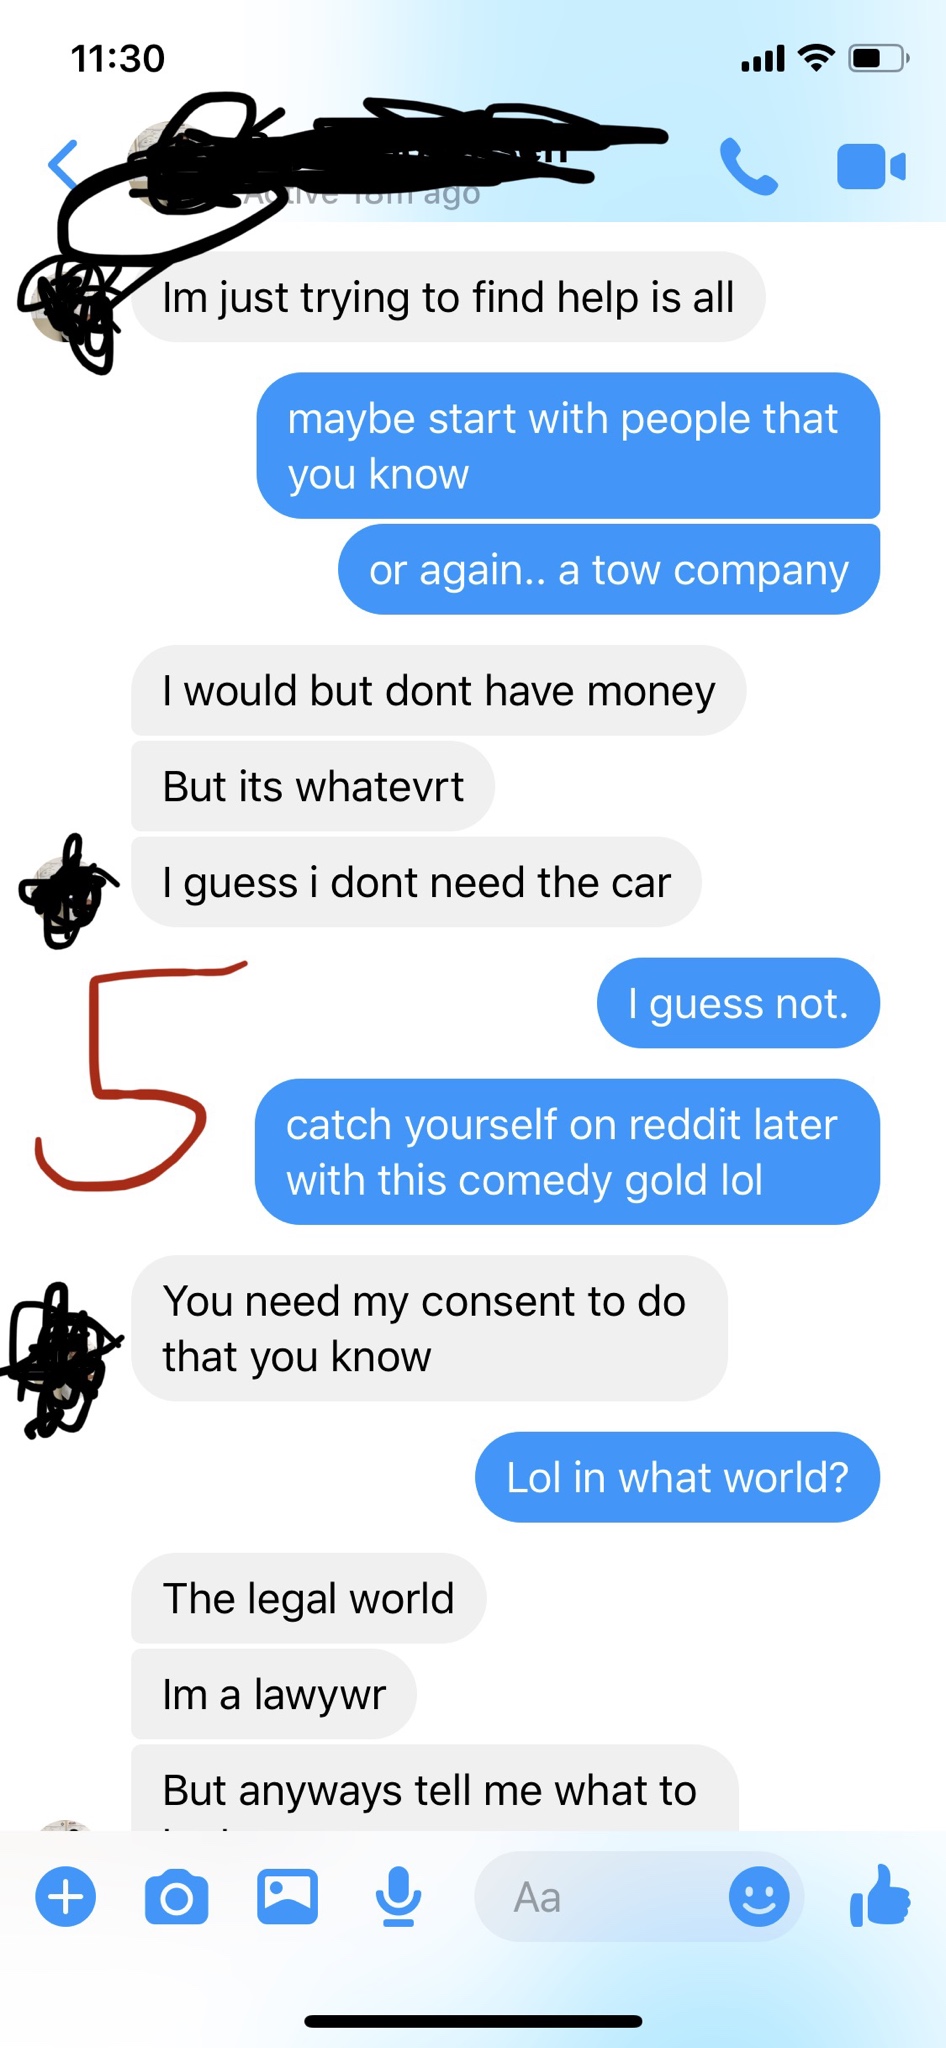 web page - 111 0 S Uivu Toi ago Im just trying to find help is all maybe start with people that you know or again.. a tow company I would but dont have money But its whatevrt I guess i dont need the car I guess not. catch yourself on reddit later with thi